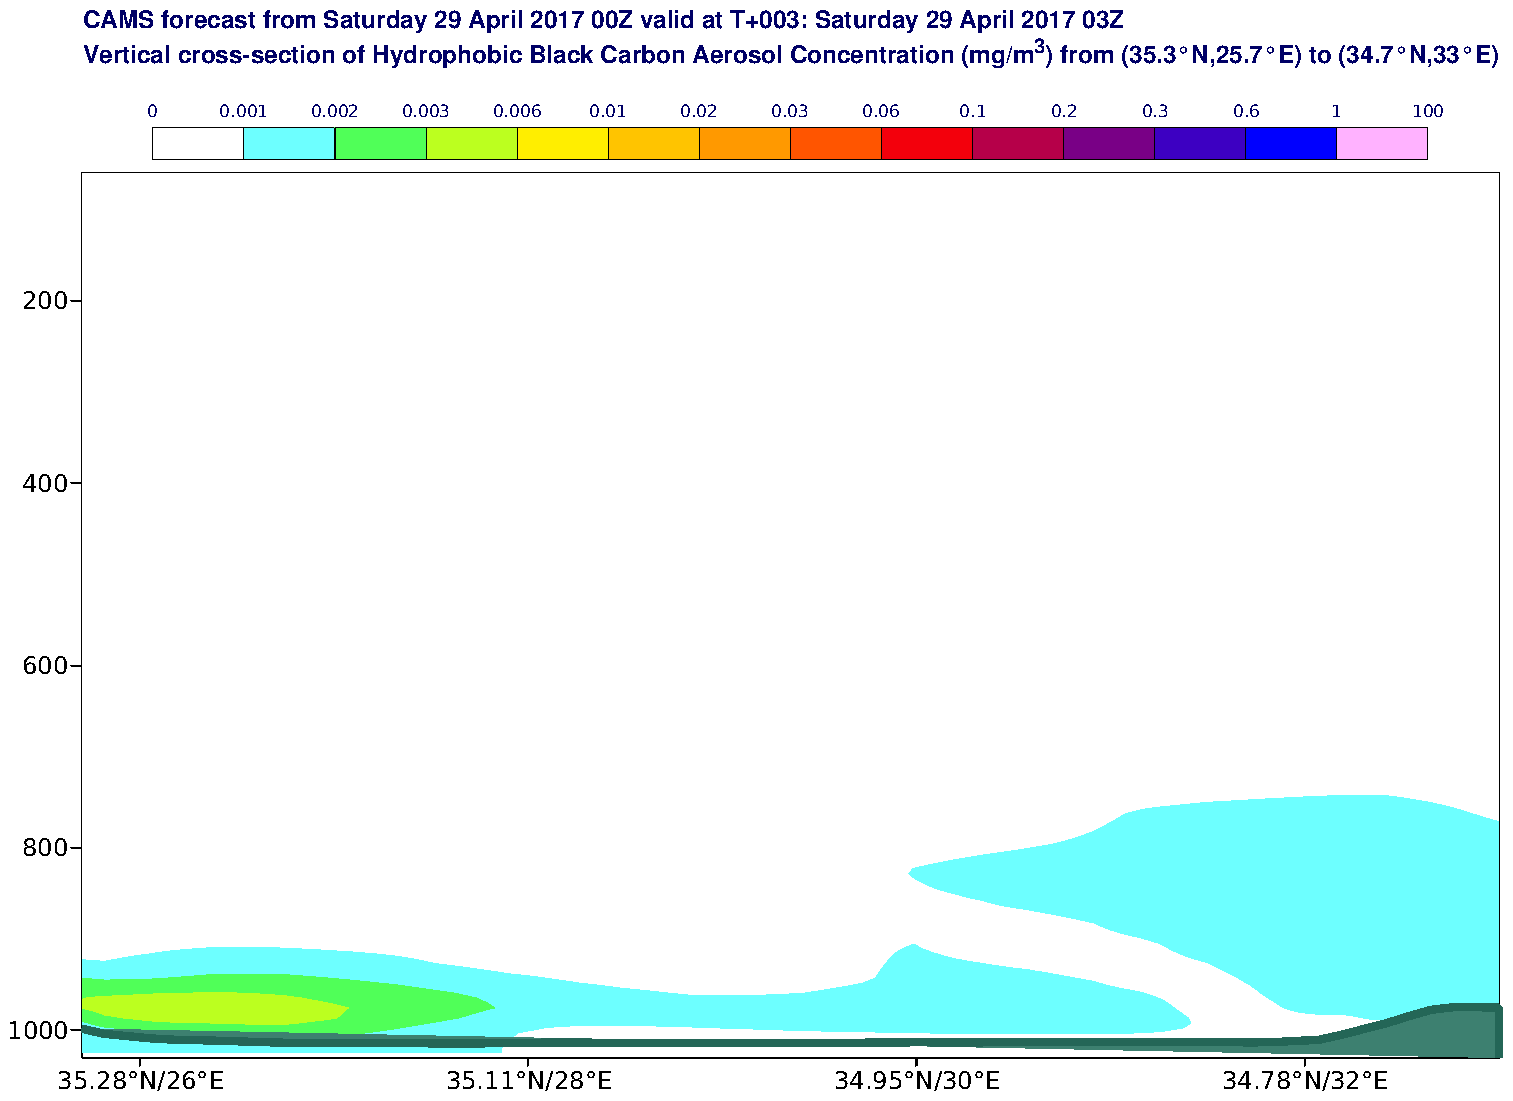 Vertical cross-section of Hydrophobic Black Carbon Aerosol Concentration (mg/m3) valid at T3 - 2017-04-29 03:00